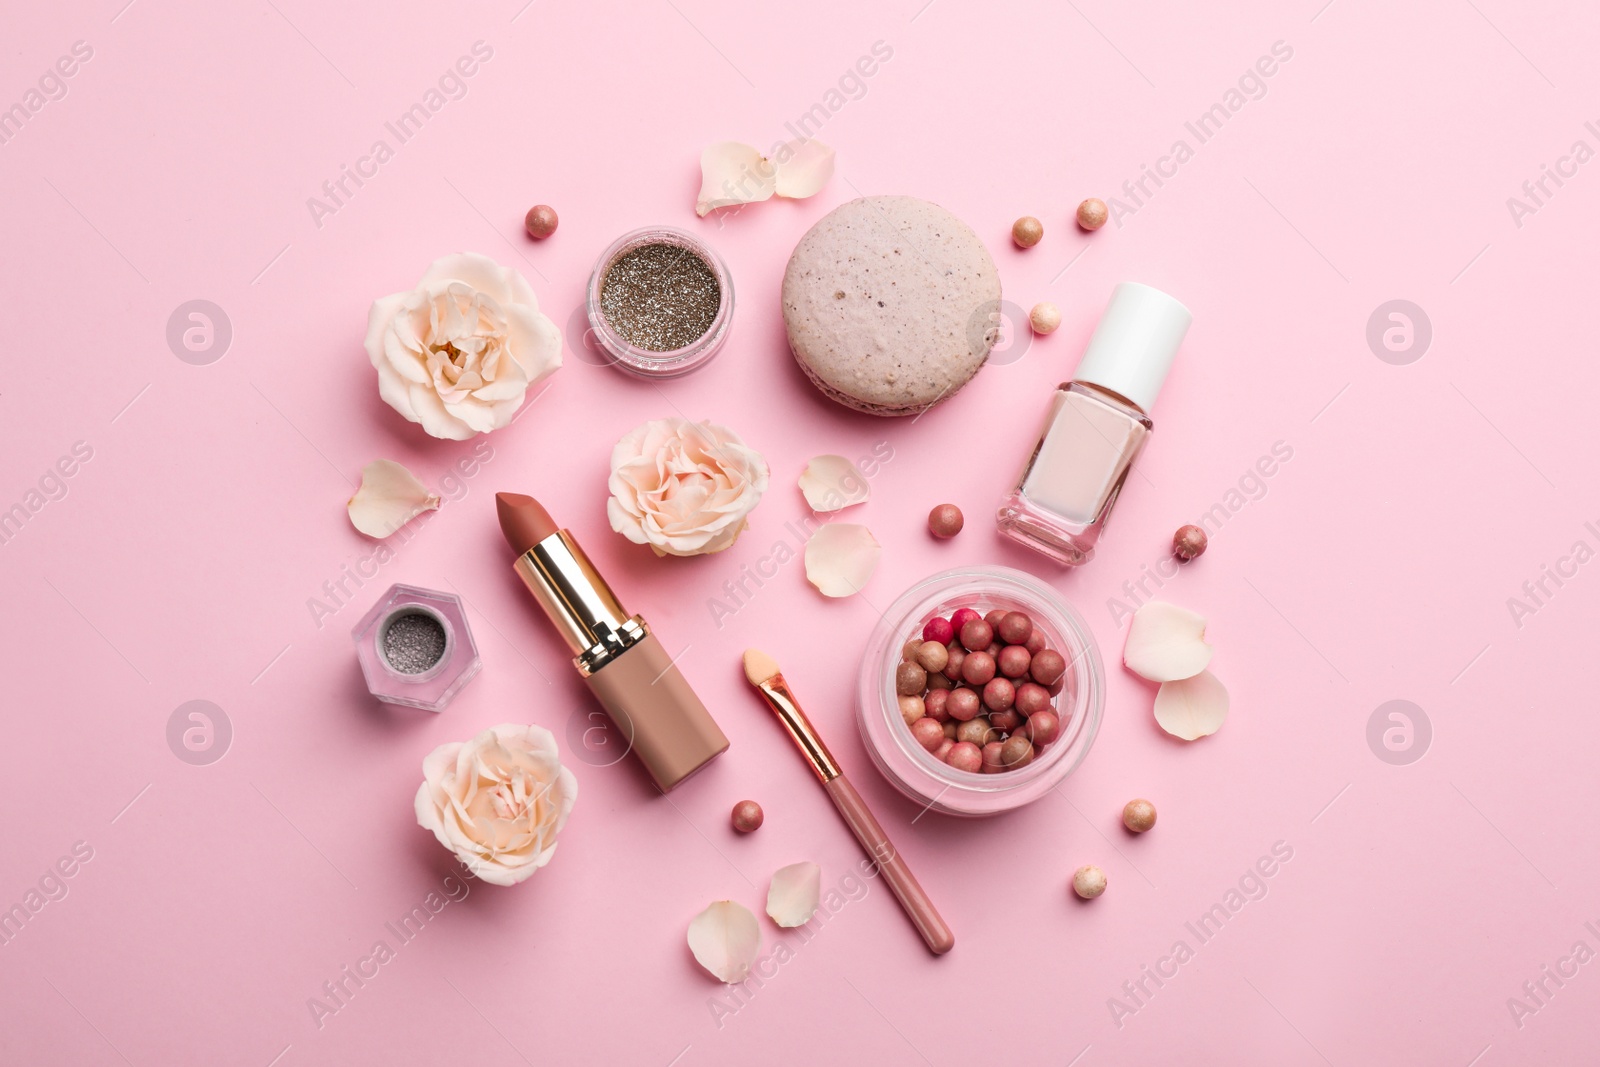 Photo of Flat lay composition with makeup products, roses and macaron on pink background